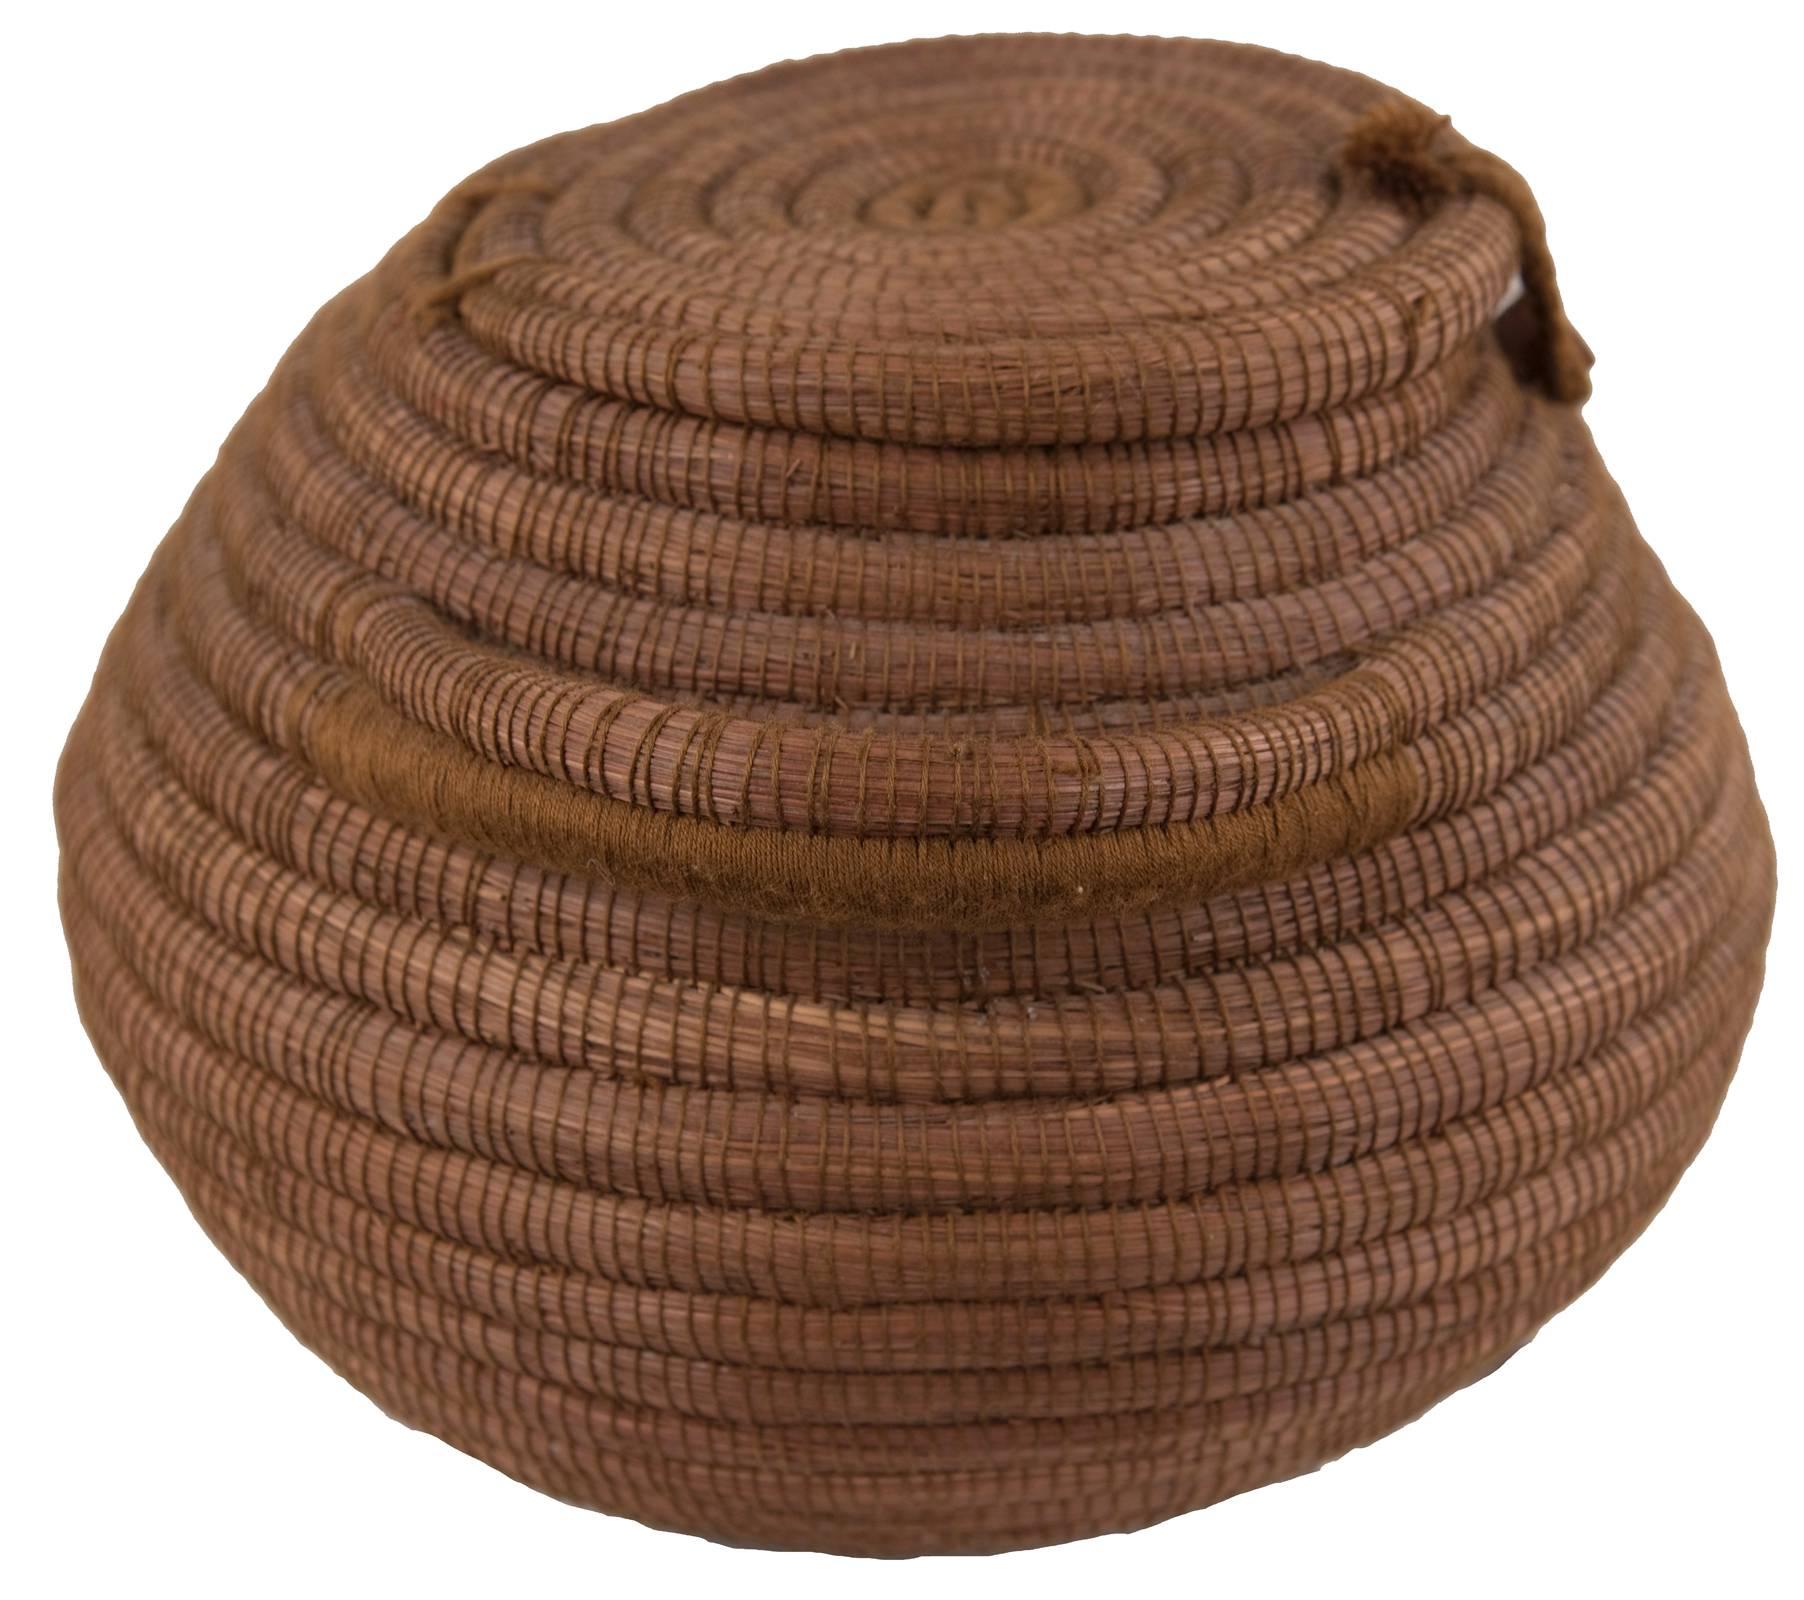 Native American Early 19th Century Papago Pine Needle Woven Coil Lidded Basket